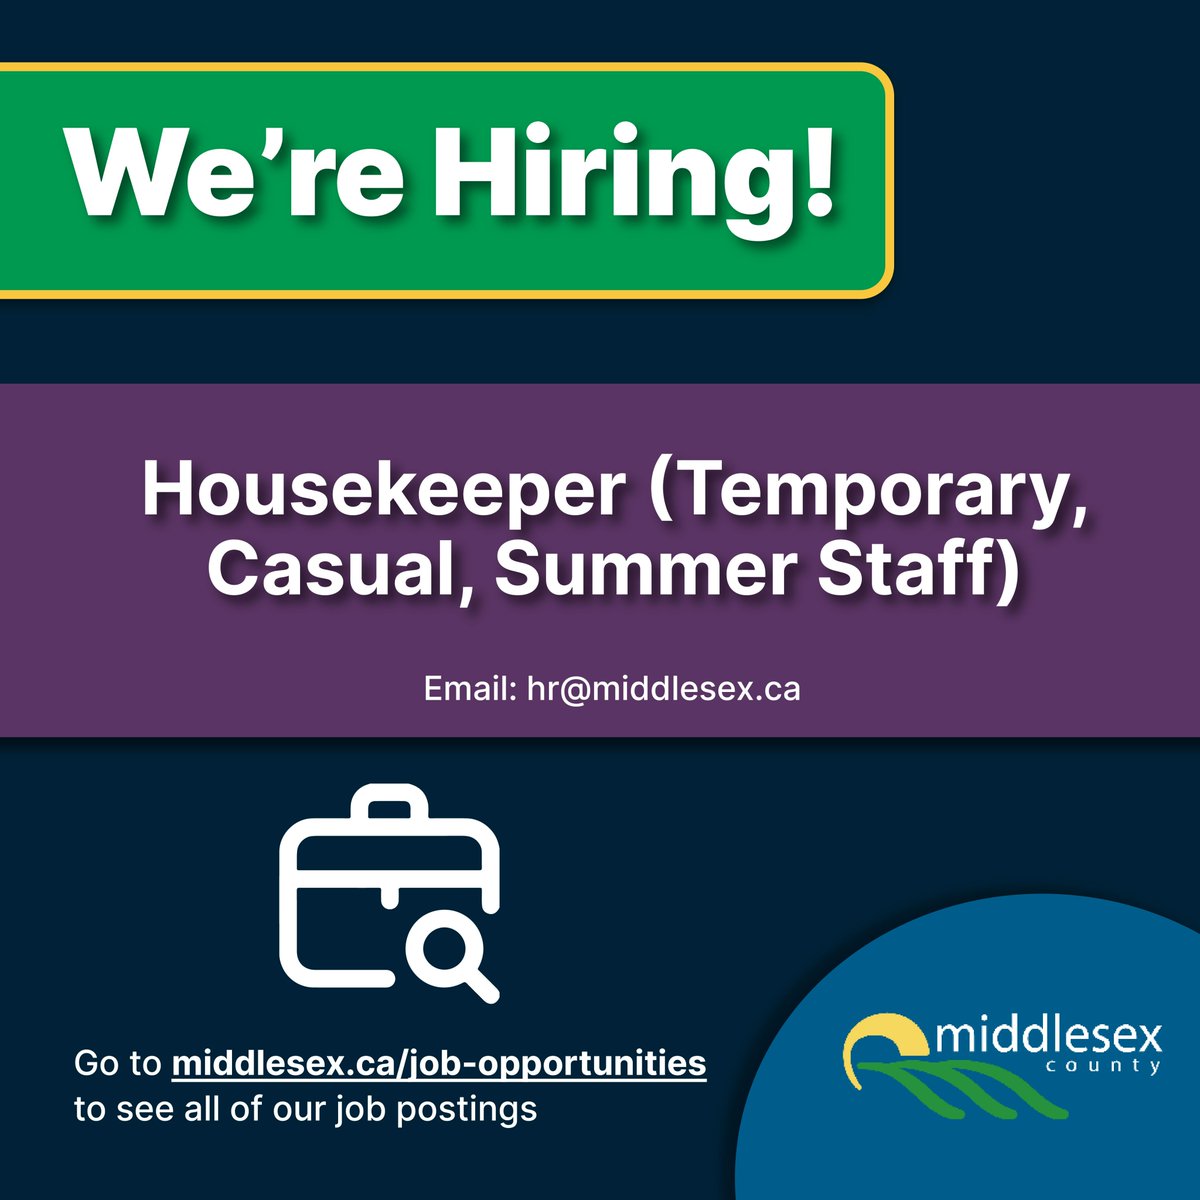 📍 Job Opportunity 📍 We're looking for dedicated individuals to join us as Housekeepers in Strathmere Lodge! If you're passionate about maintaining cleanliness and creating a welcoming environment, this opportunity is for you. Check out the details ➡ bit.ly/3W6resn